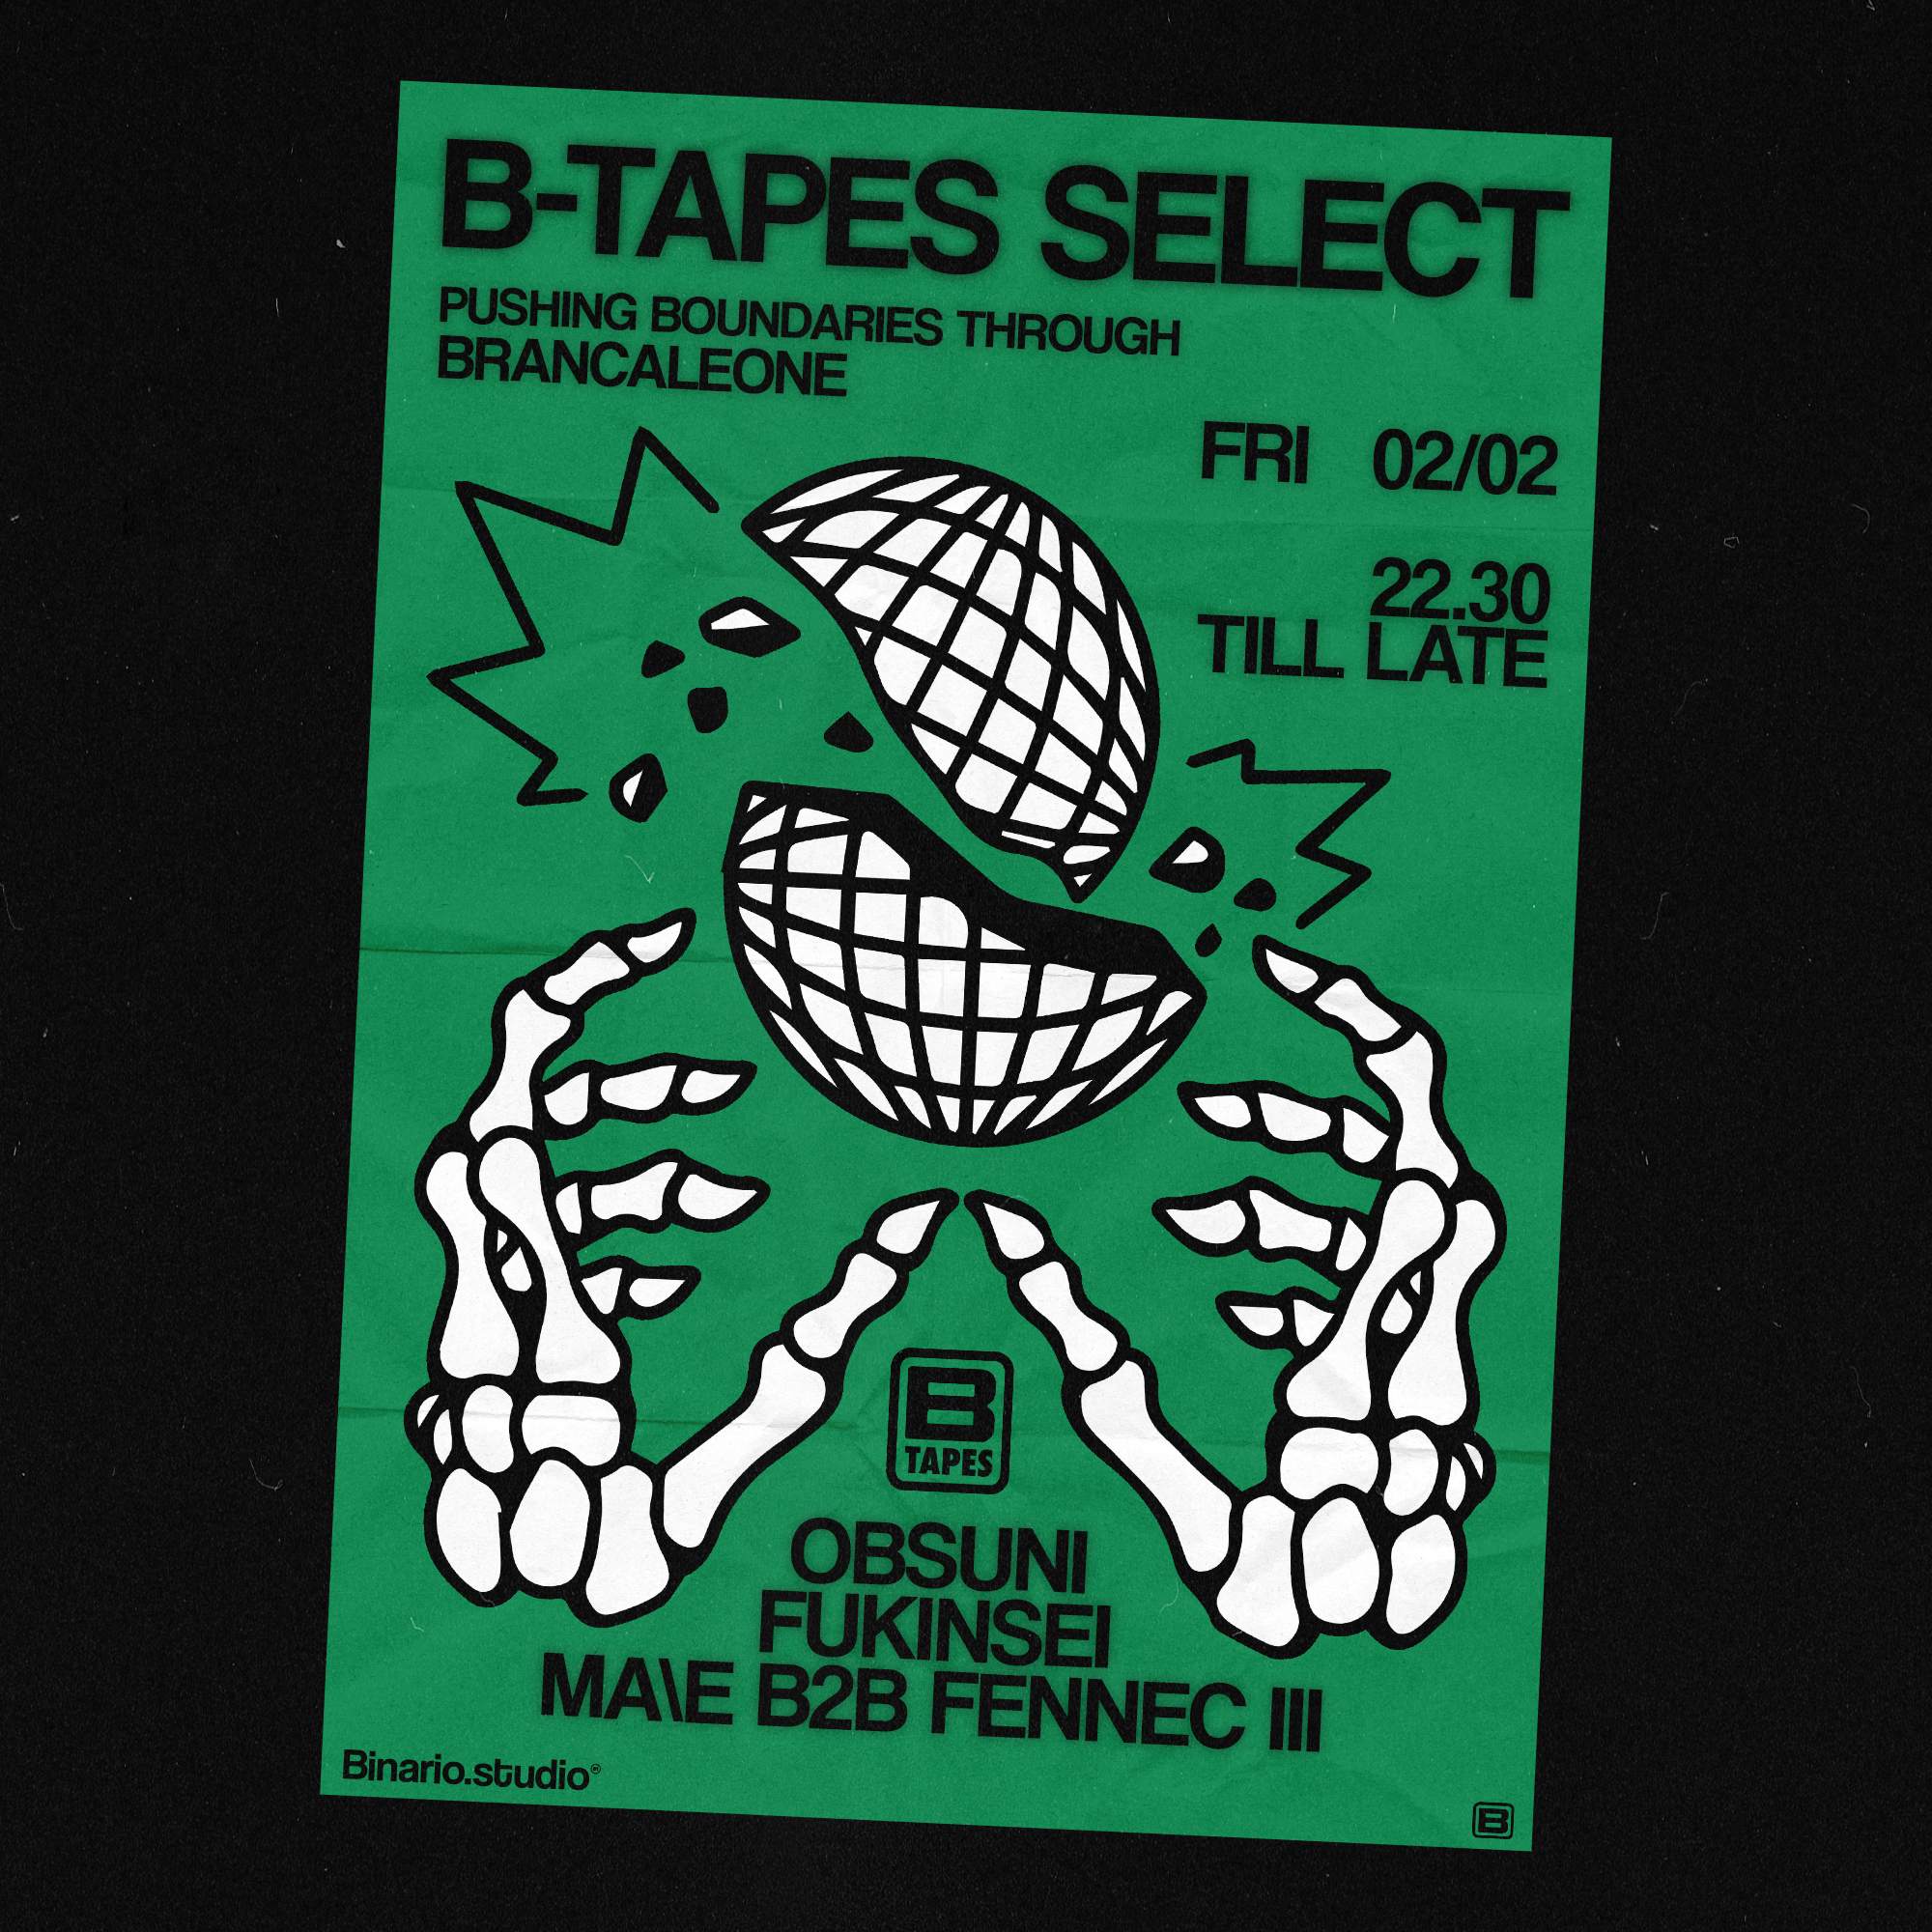 B-TAPES SELECT - フライヤー裏